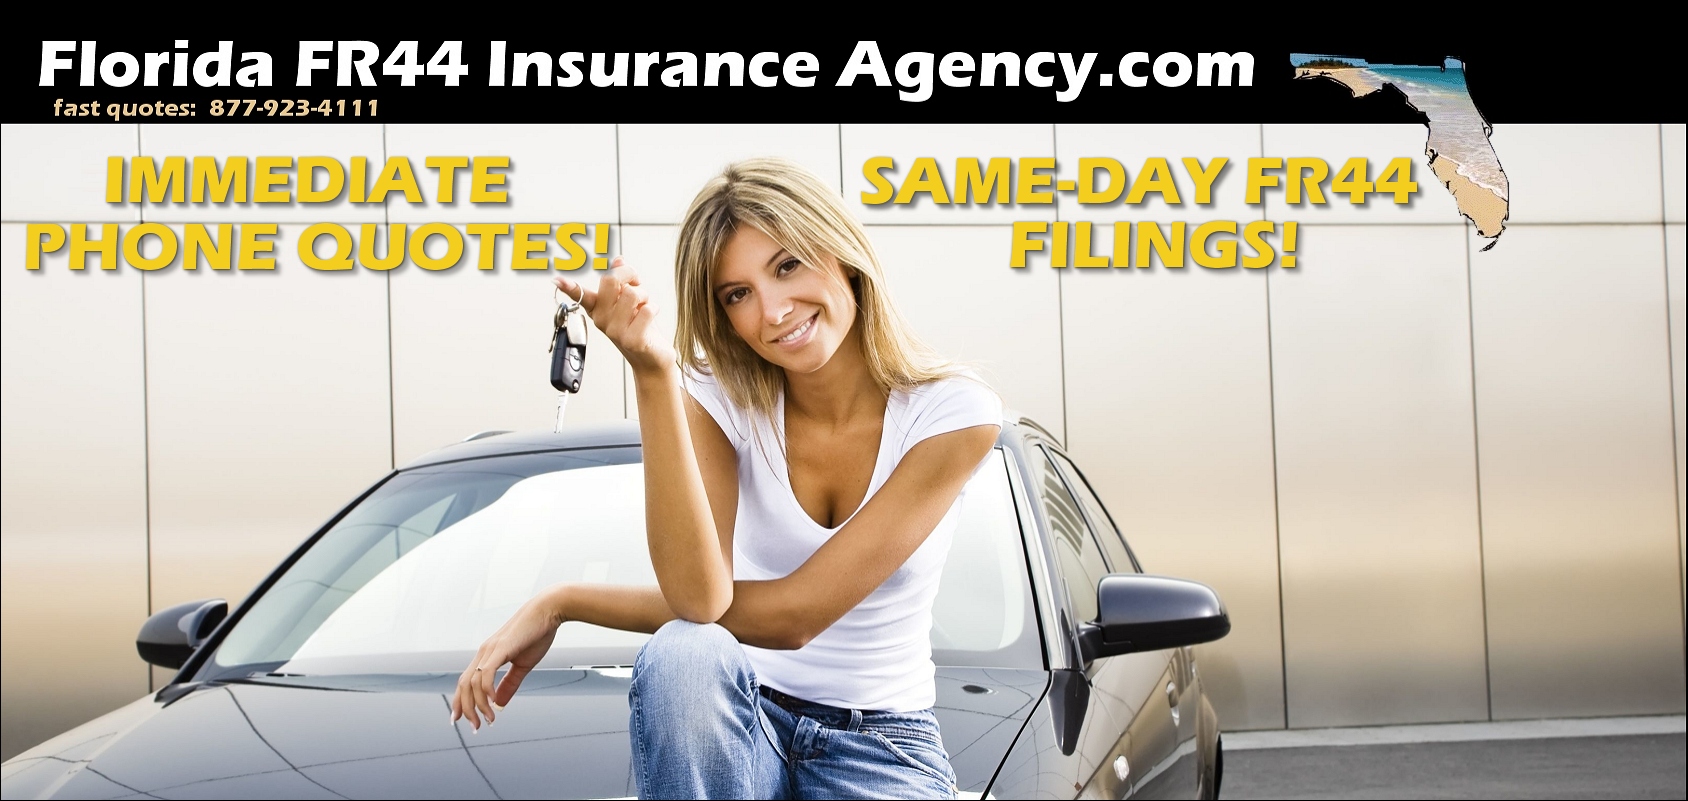 low cost Florida FR44 insurance quotes